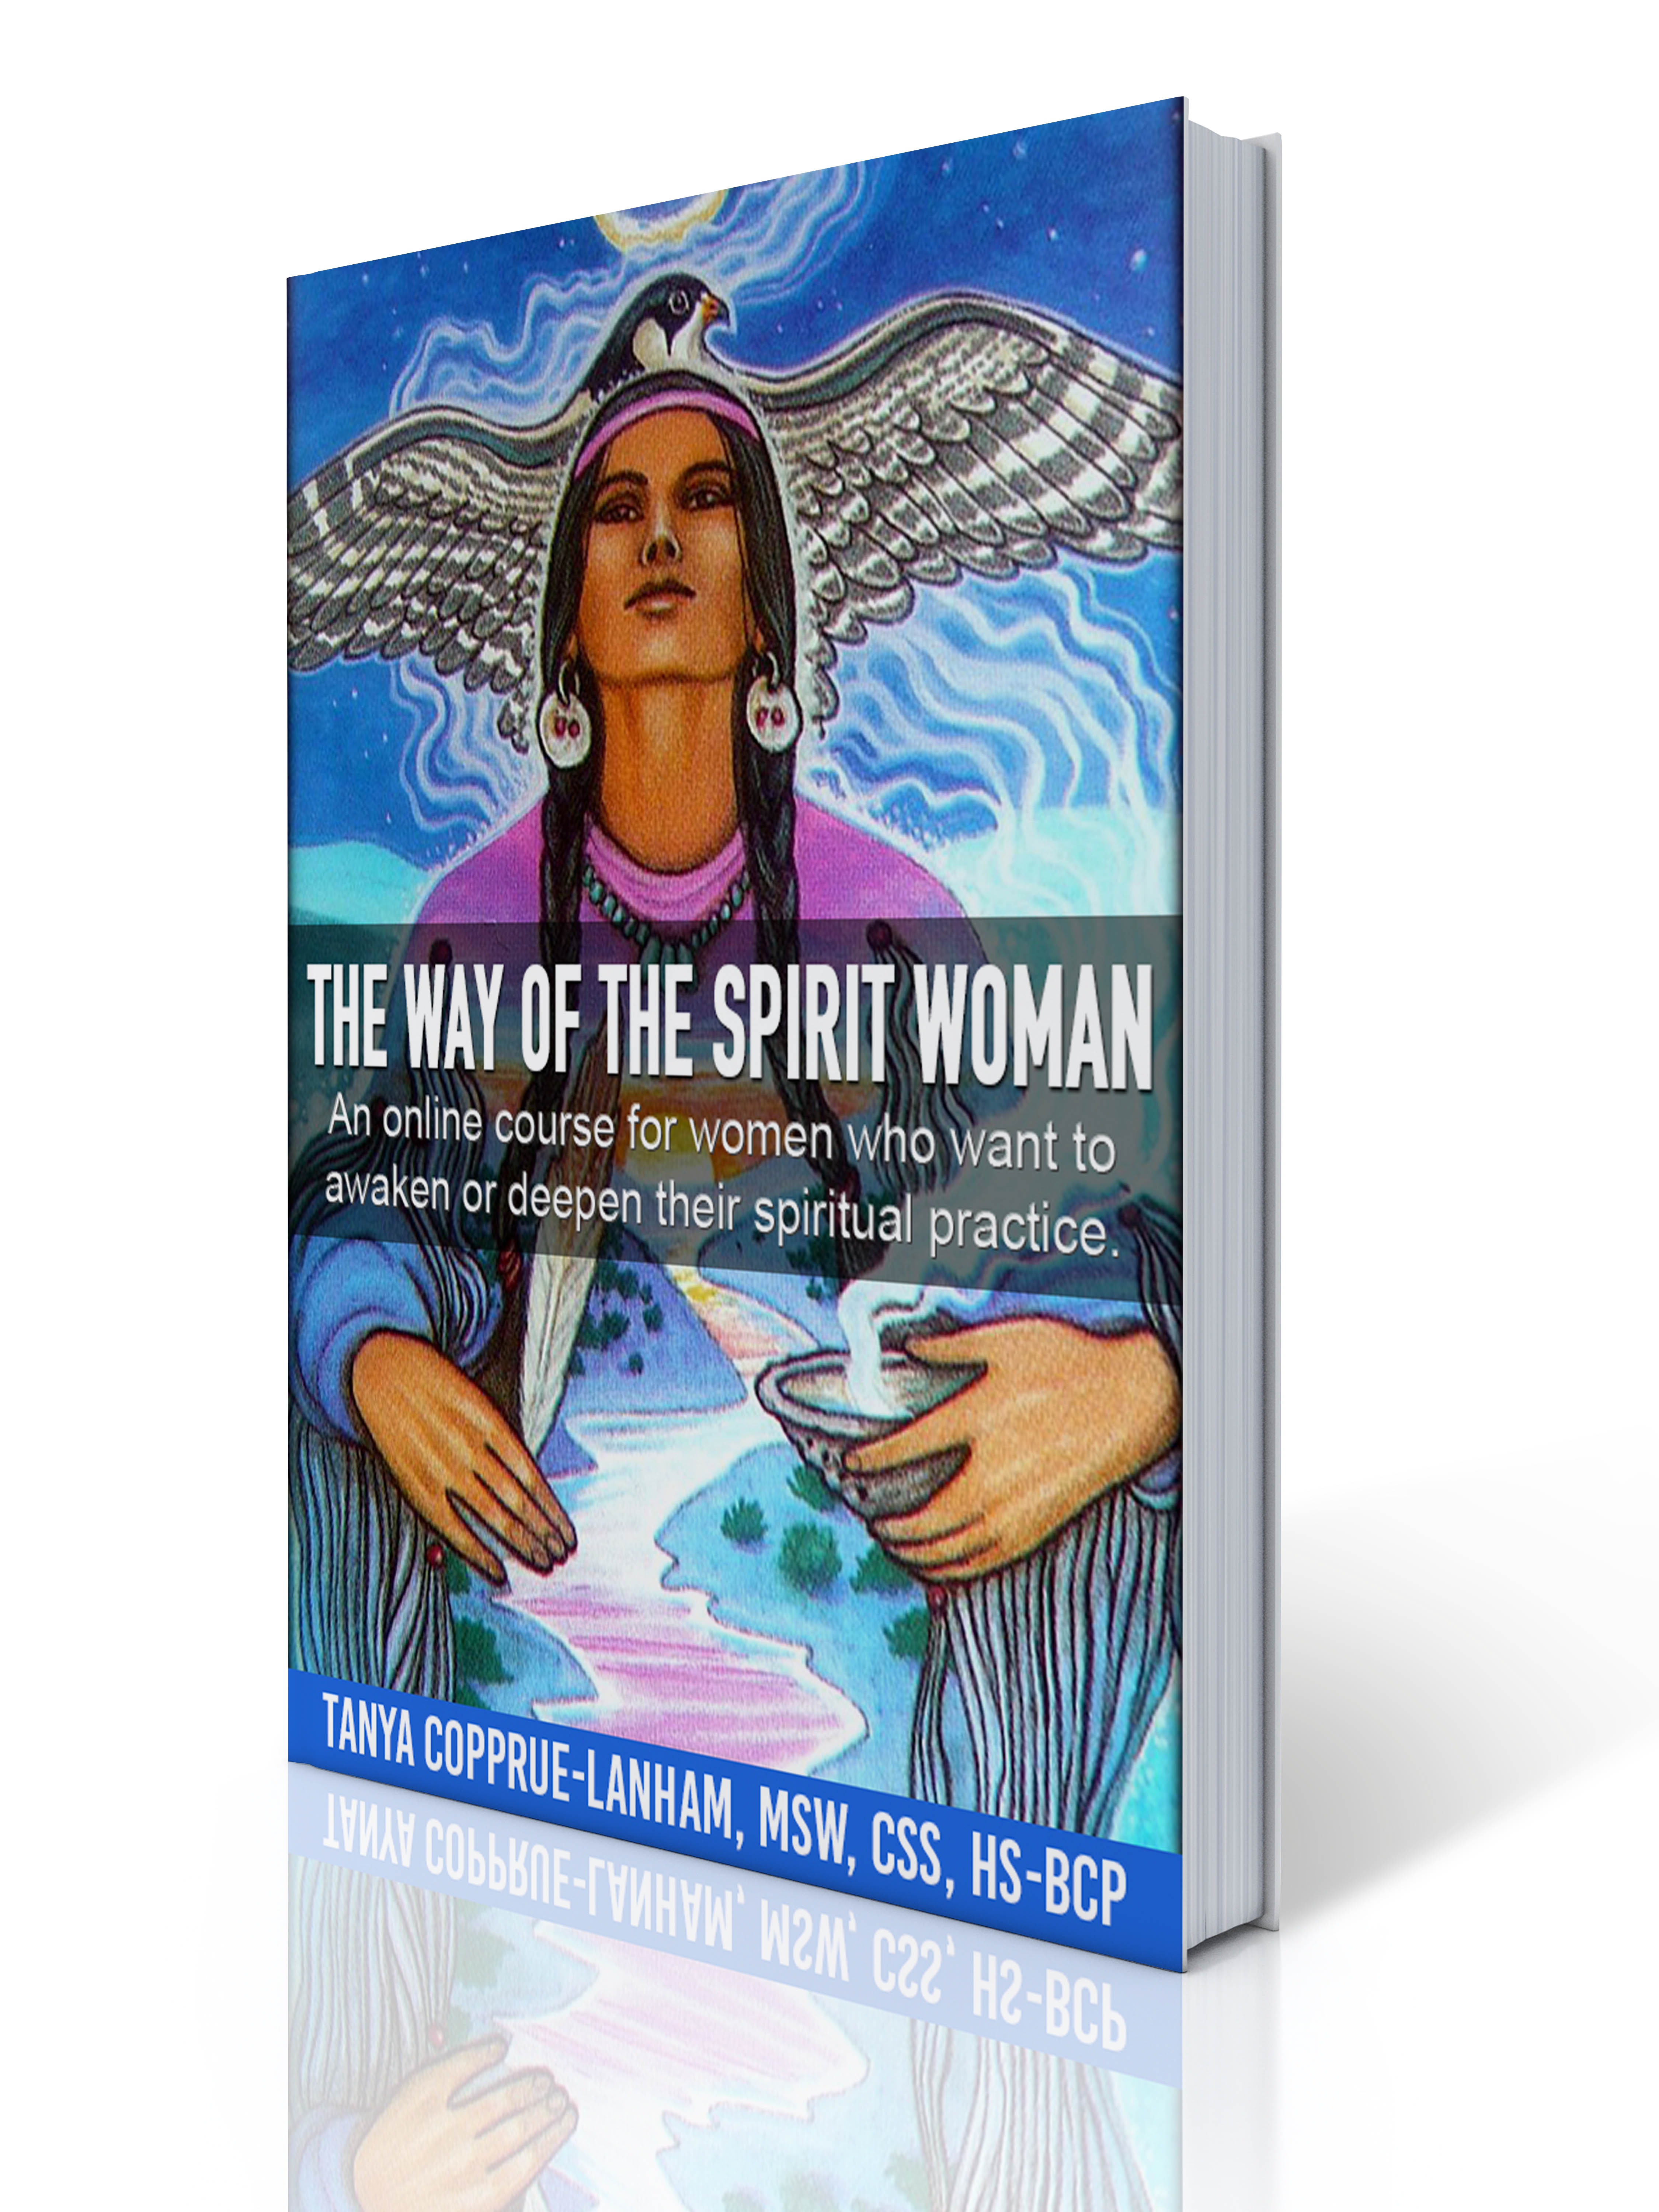 The Way of The Spirit Woman